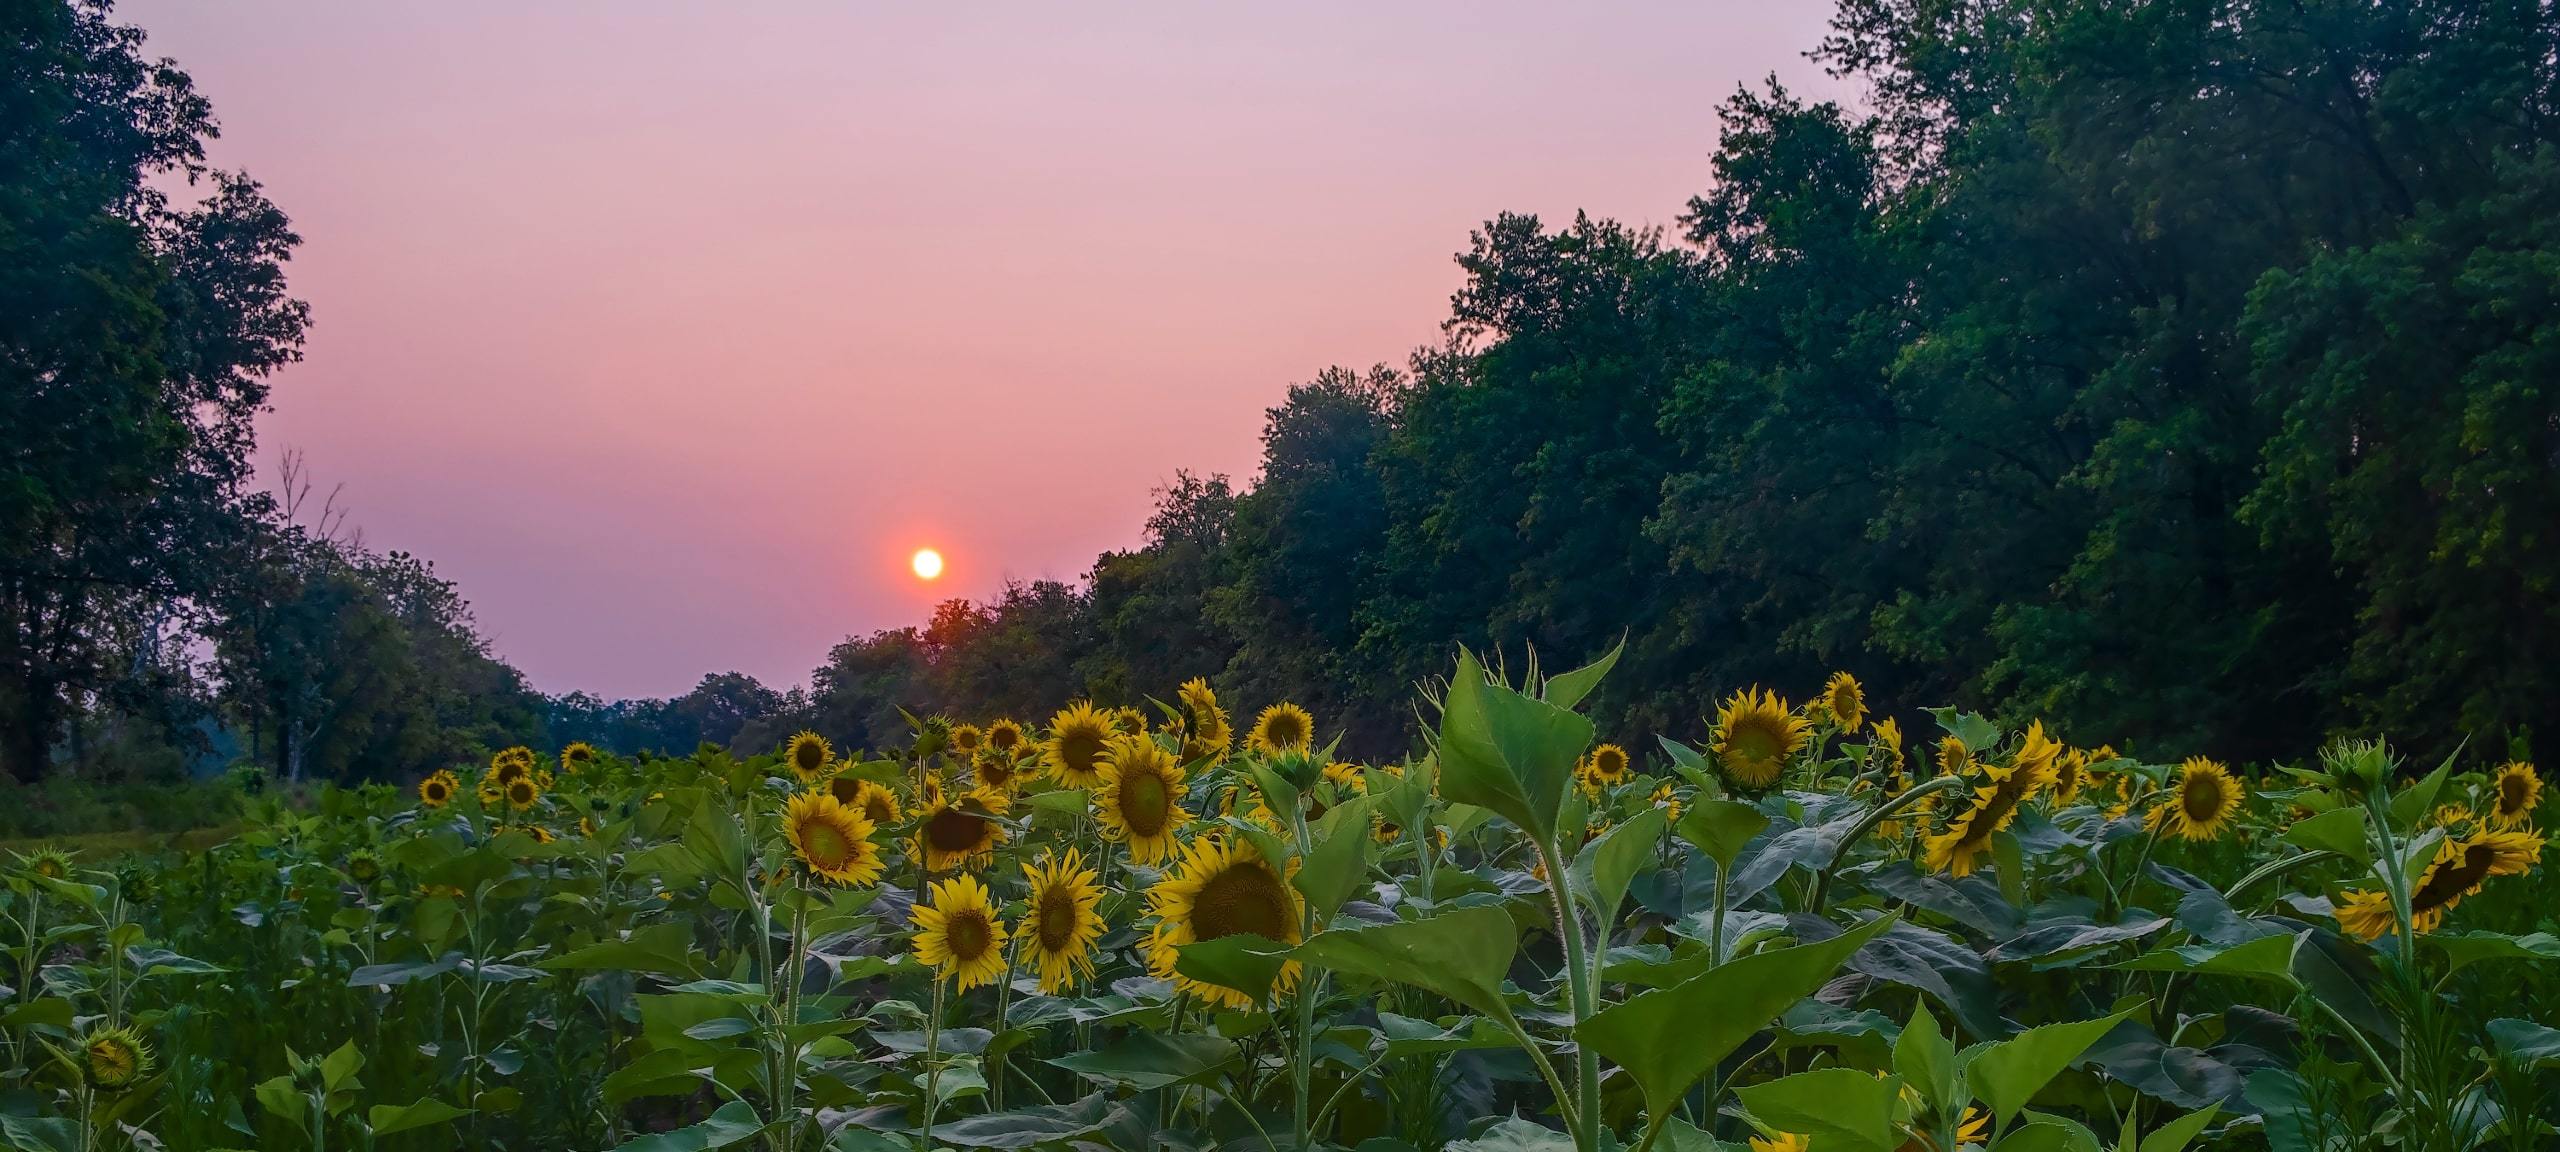 Sunset over sunflower field in Cecil County, Maryland